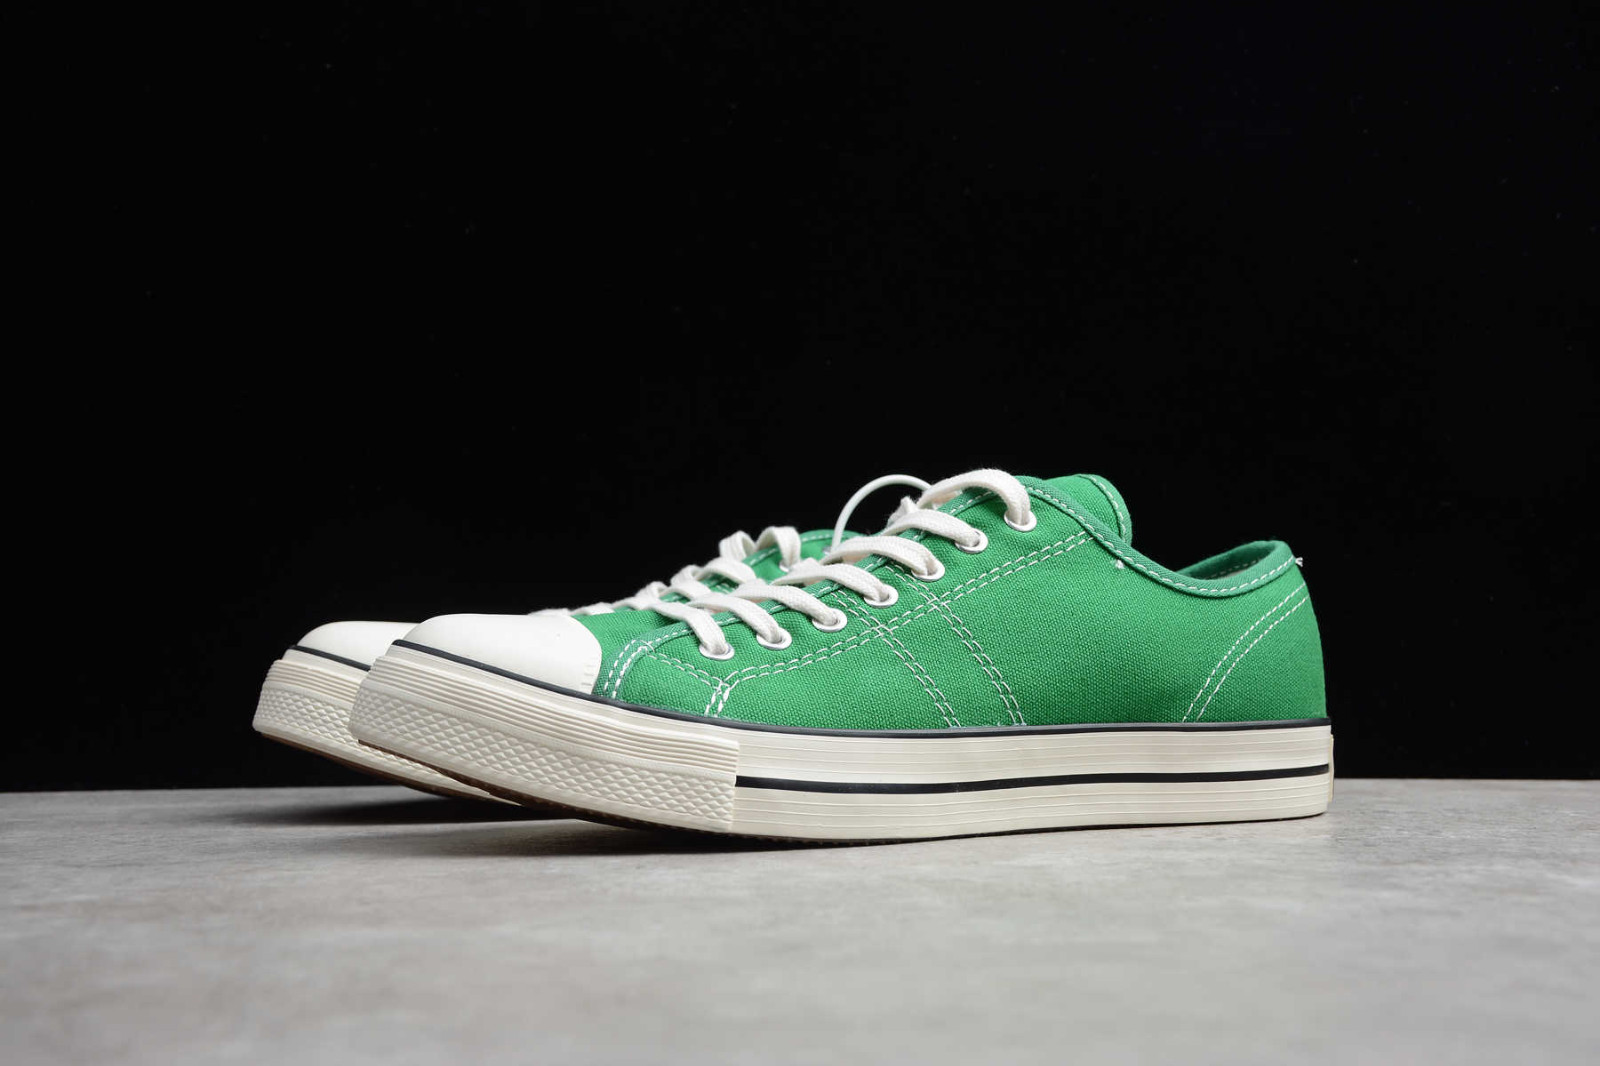 Converse Lucky Star Ox Green Gum 164216C - MultiscaleconsultingShops